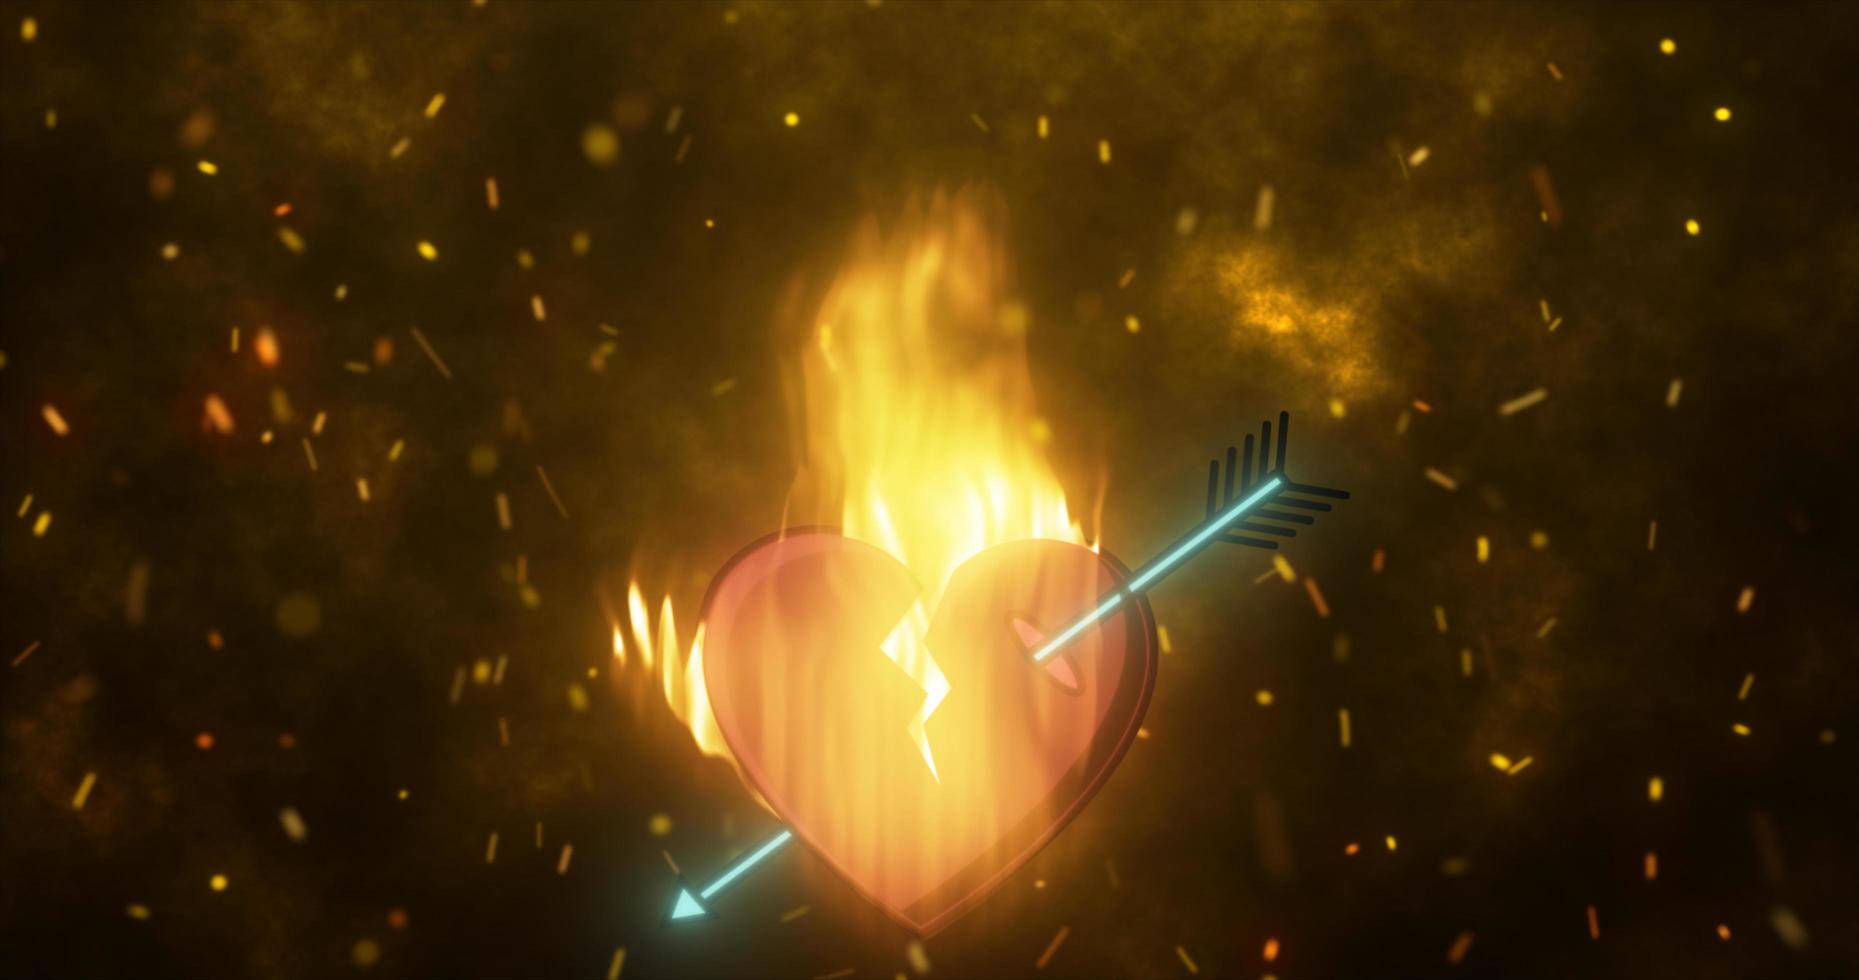 Abstract fiery loving heart burning in a flame pierced by an arrow of Cupid on a background of sparks photo